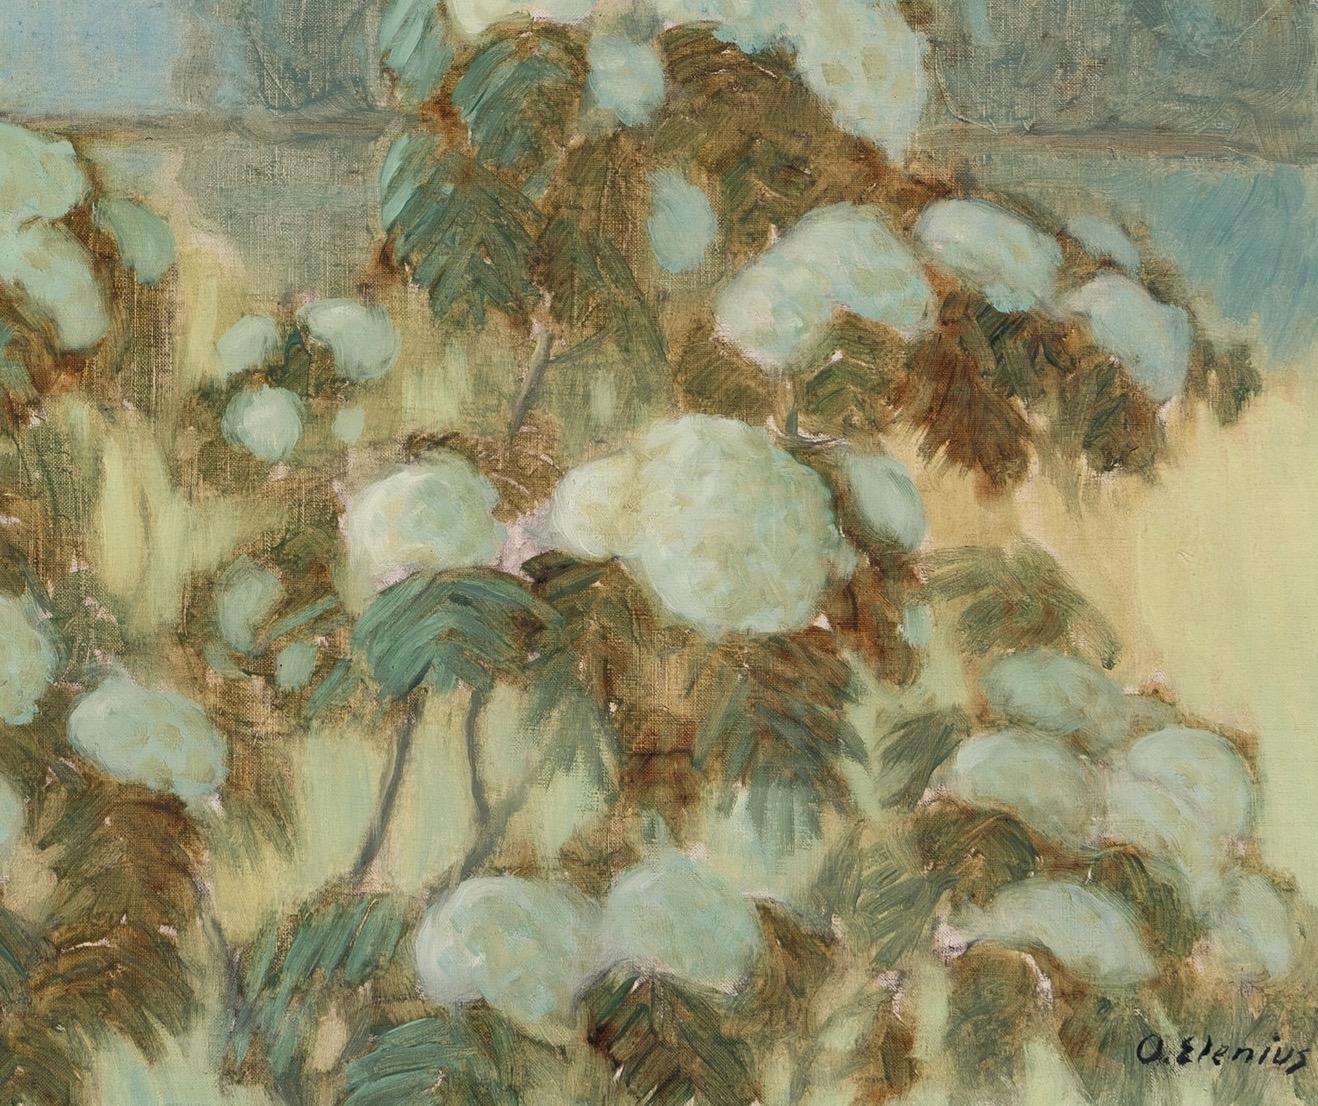 Oskar Elenius, Blossoming Rowan Tree in Landscape. Signed and Dated 1917. 3